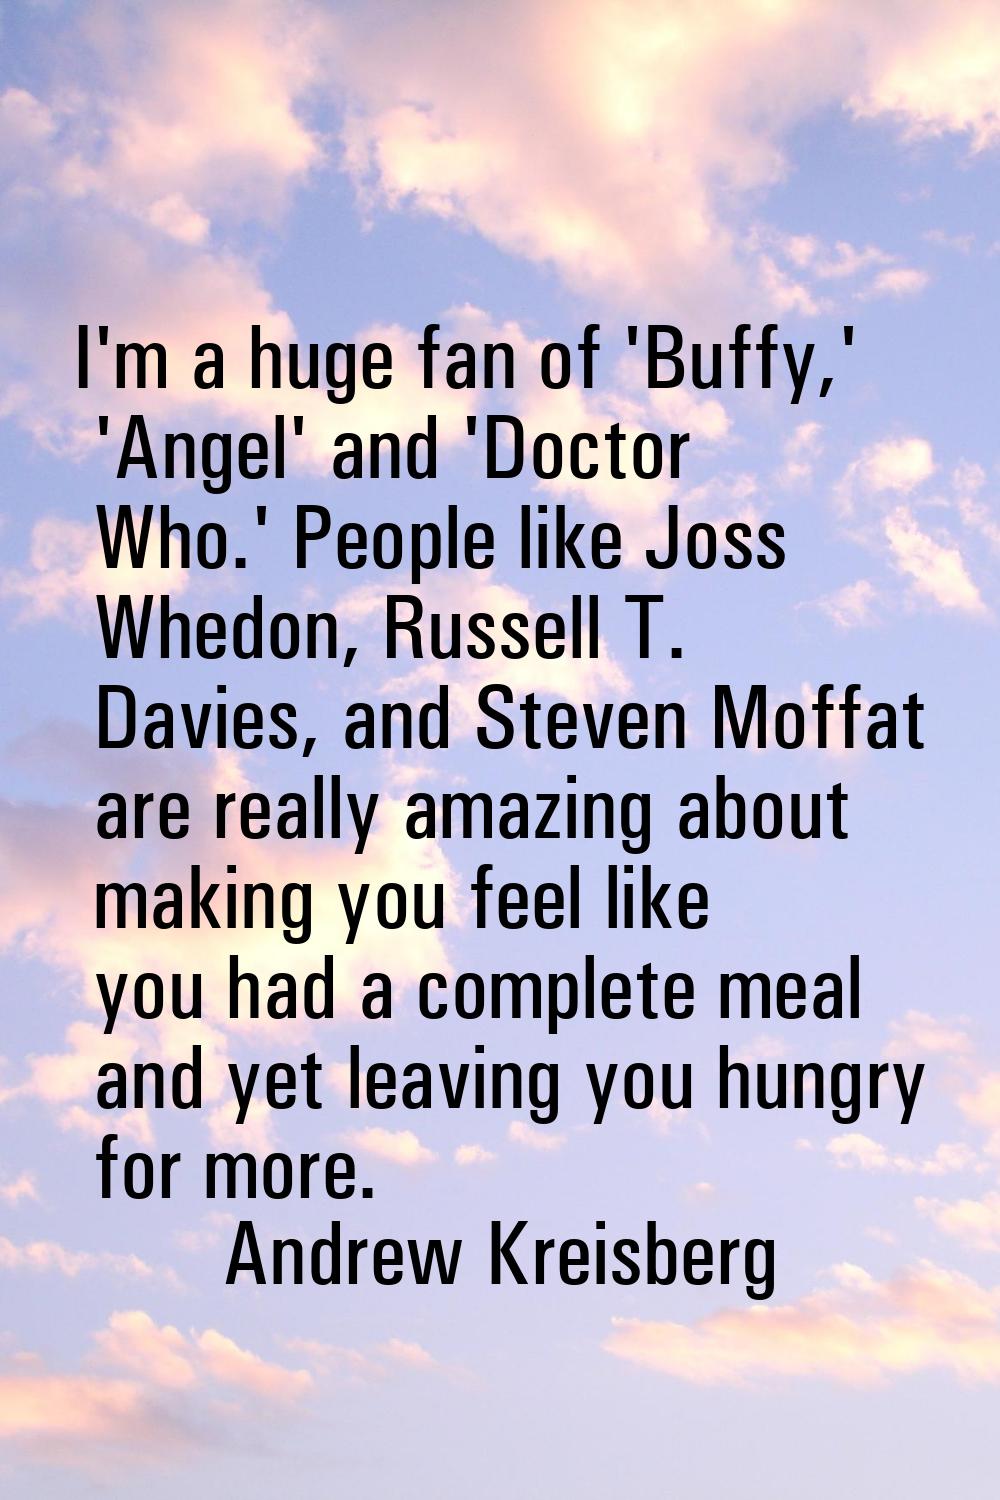 I'm a huge fan of 'Buffy,' 'Angel' and 'Doctor Who.' People like Joss Whedon, Russell T. Davies, an